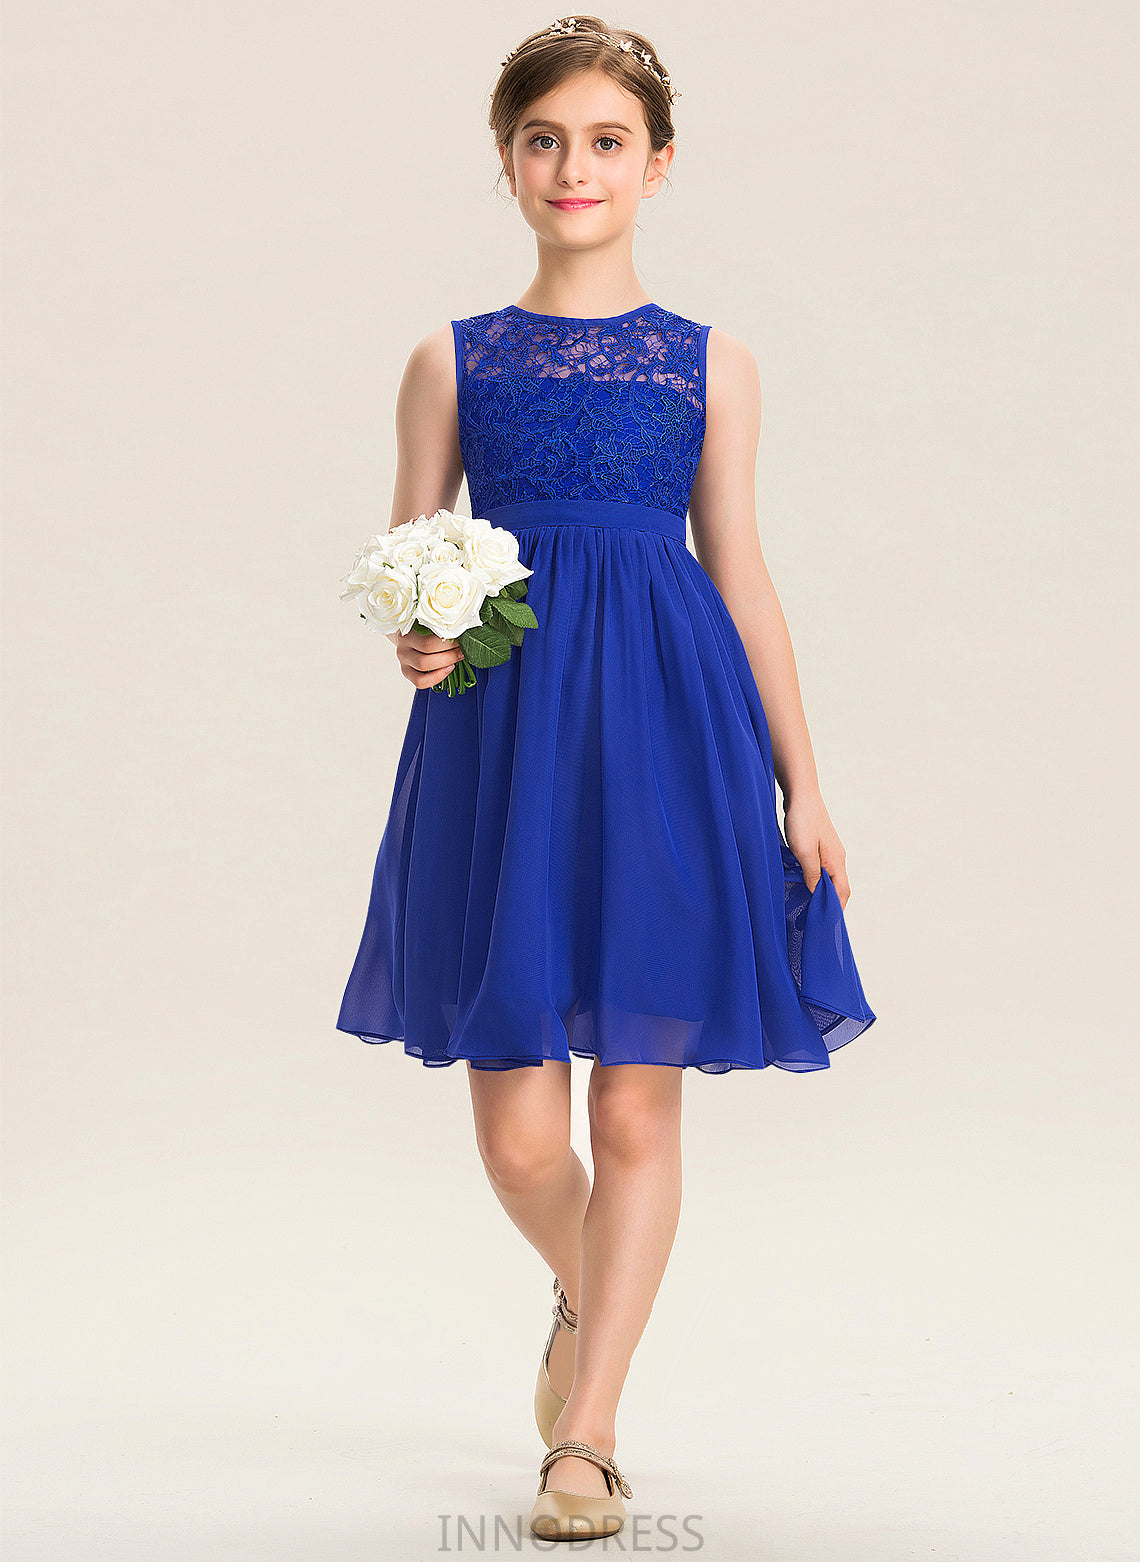 Knee-Length Neck Isabell Chiffon A-Line Junior Bridesmaid Dresses Lace Scoop